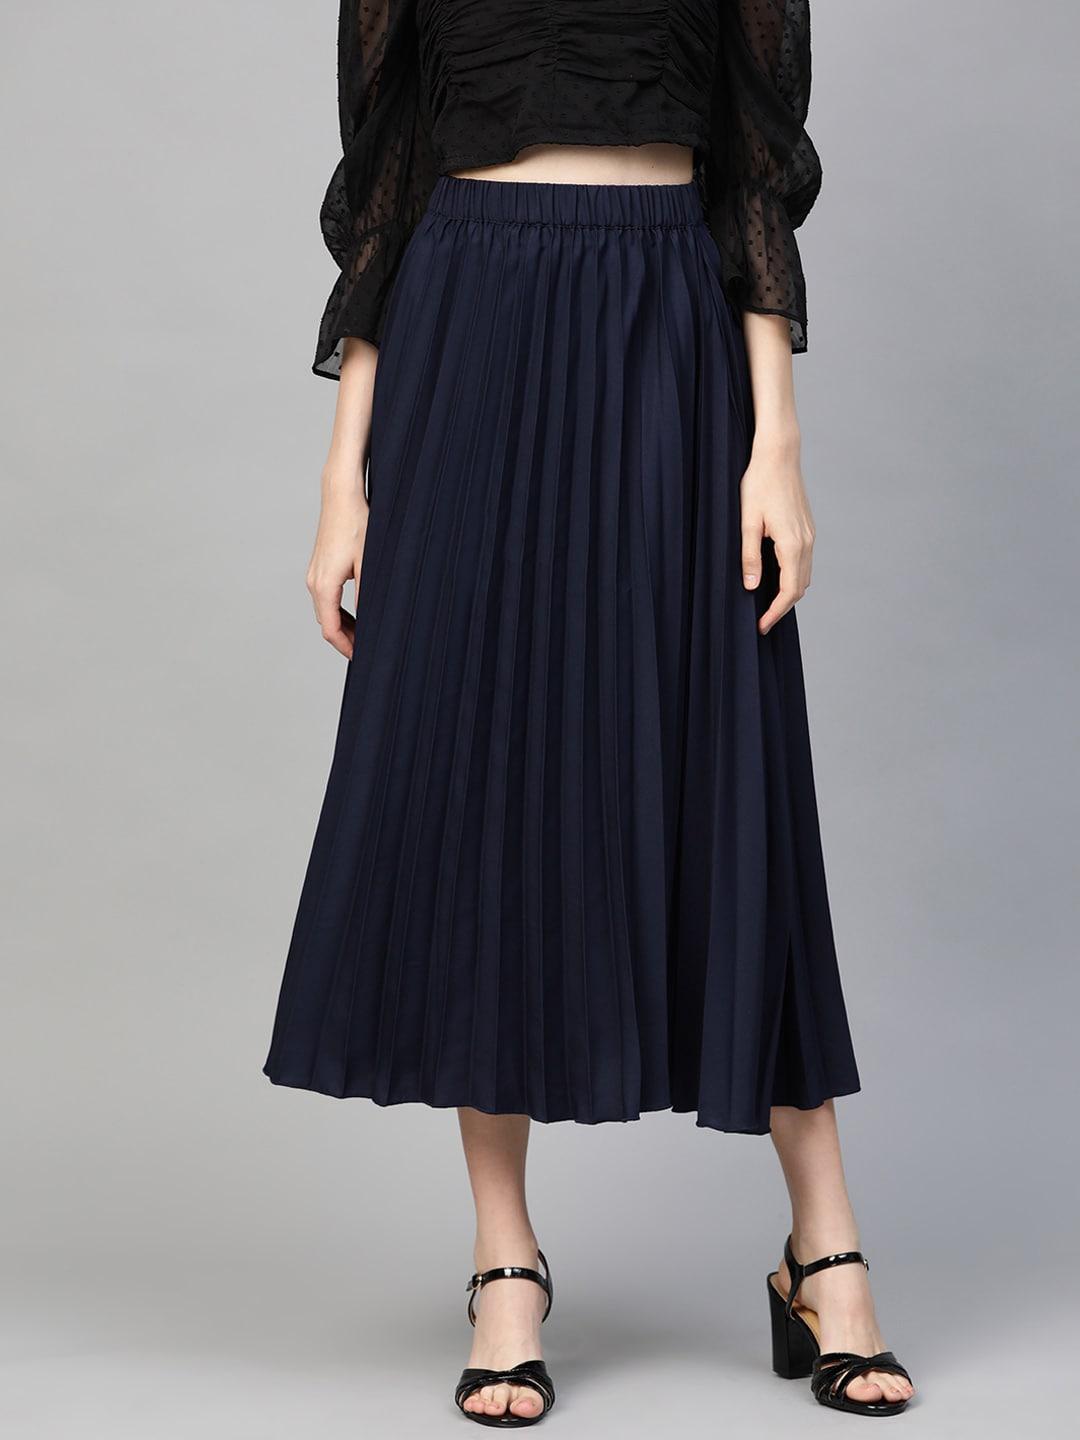 pluss-women-navy-blue-solid-accordion-pleated-a-line-skirt